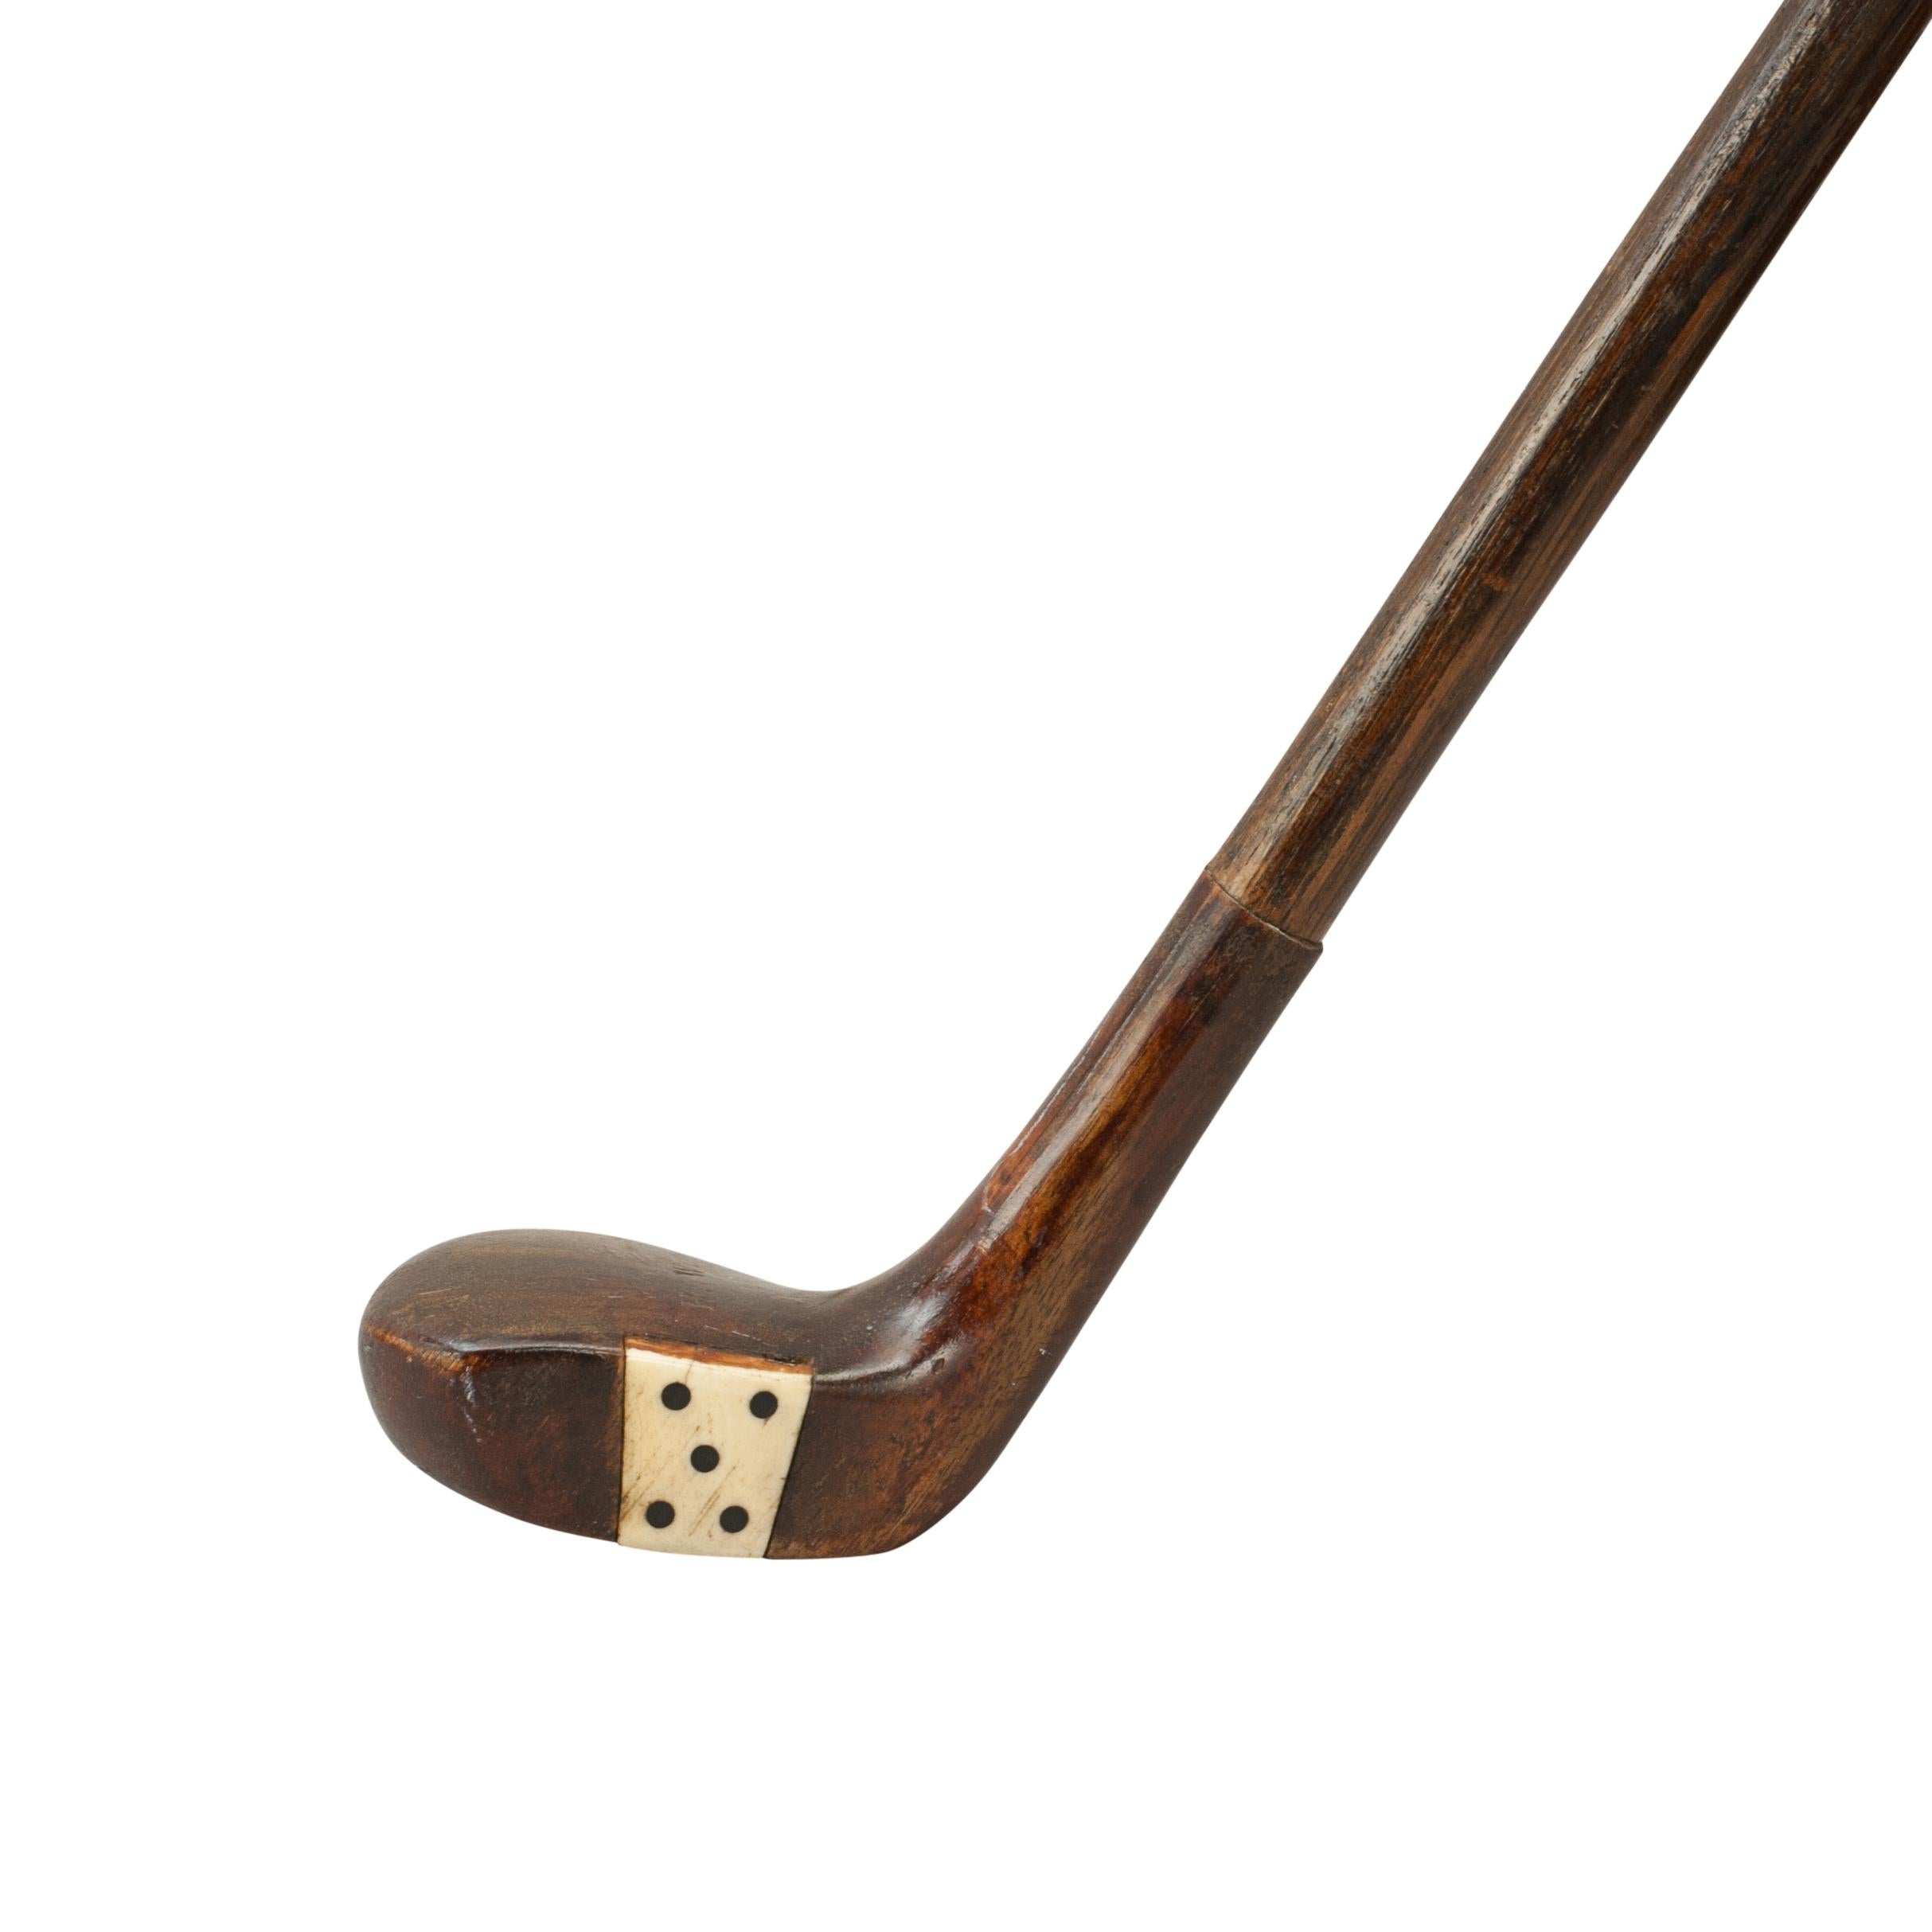 Antique Sunday Club, Golf Club walking stick.
A desirable walking cane with the handle in the shape of a golf club head. The gentleman's walking stick has a persimmon club head with a pegged horn insert and a lead weight to the rear as the handle.